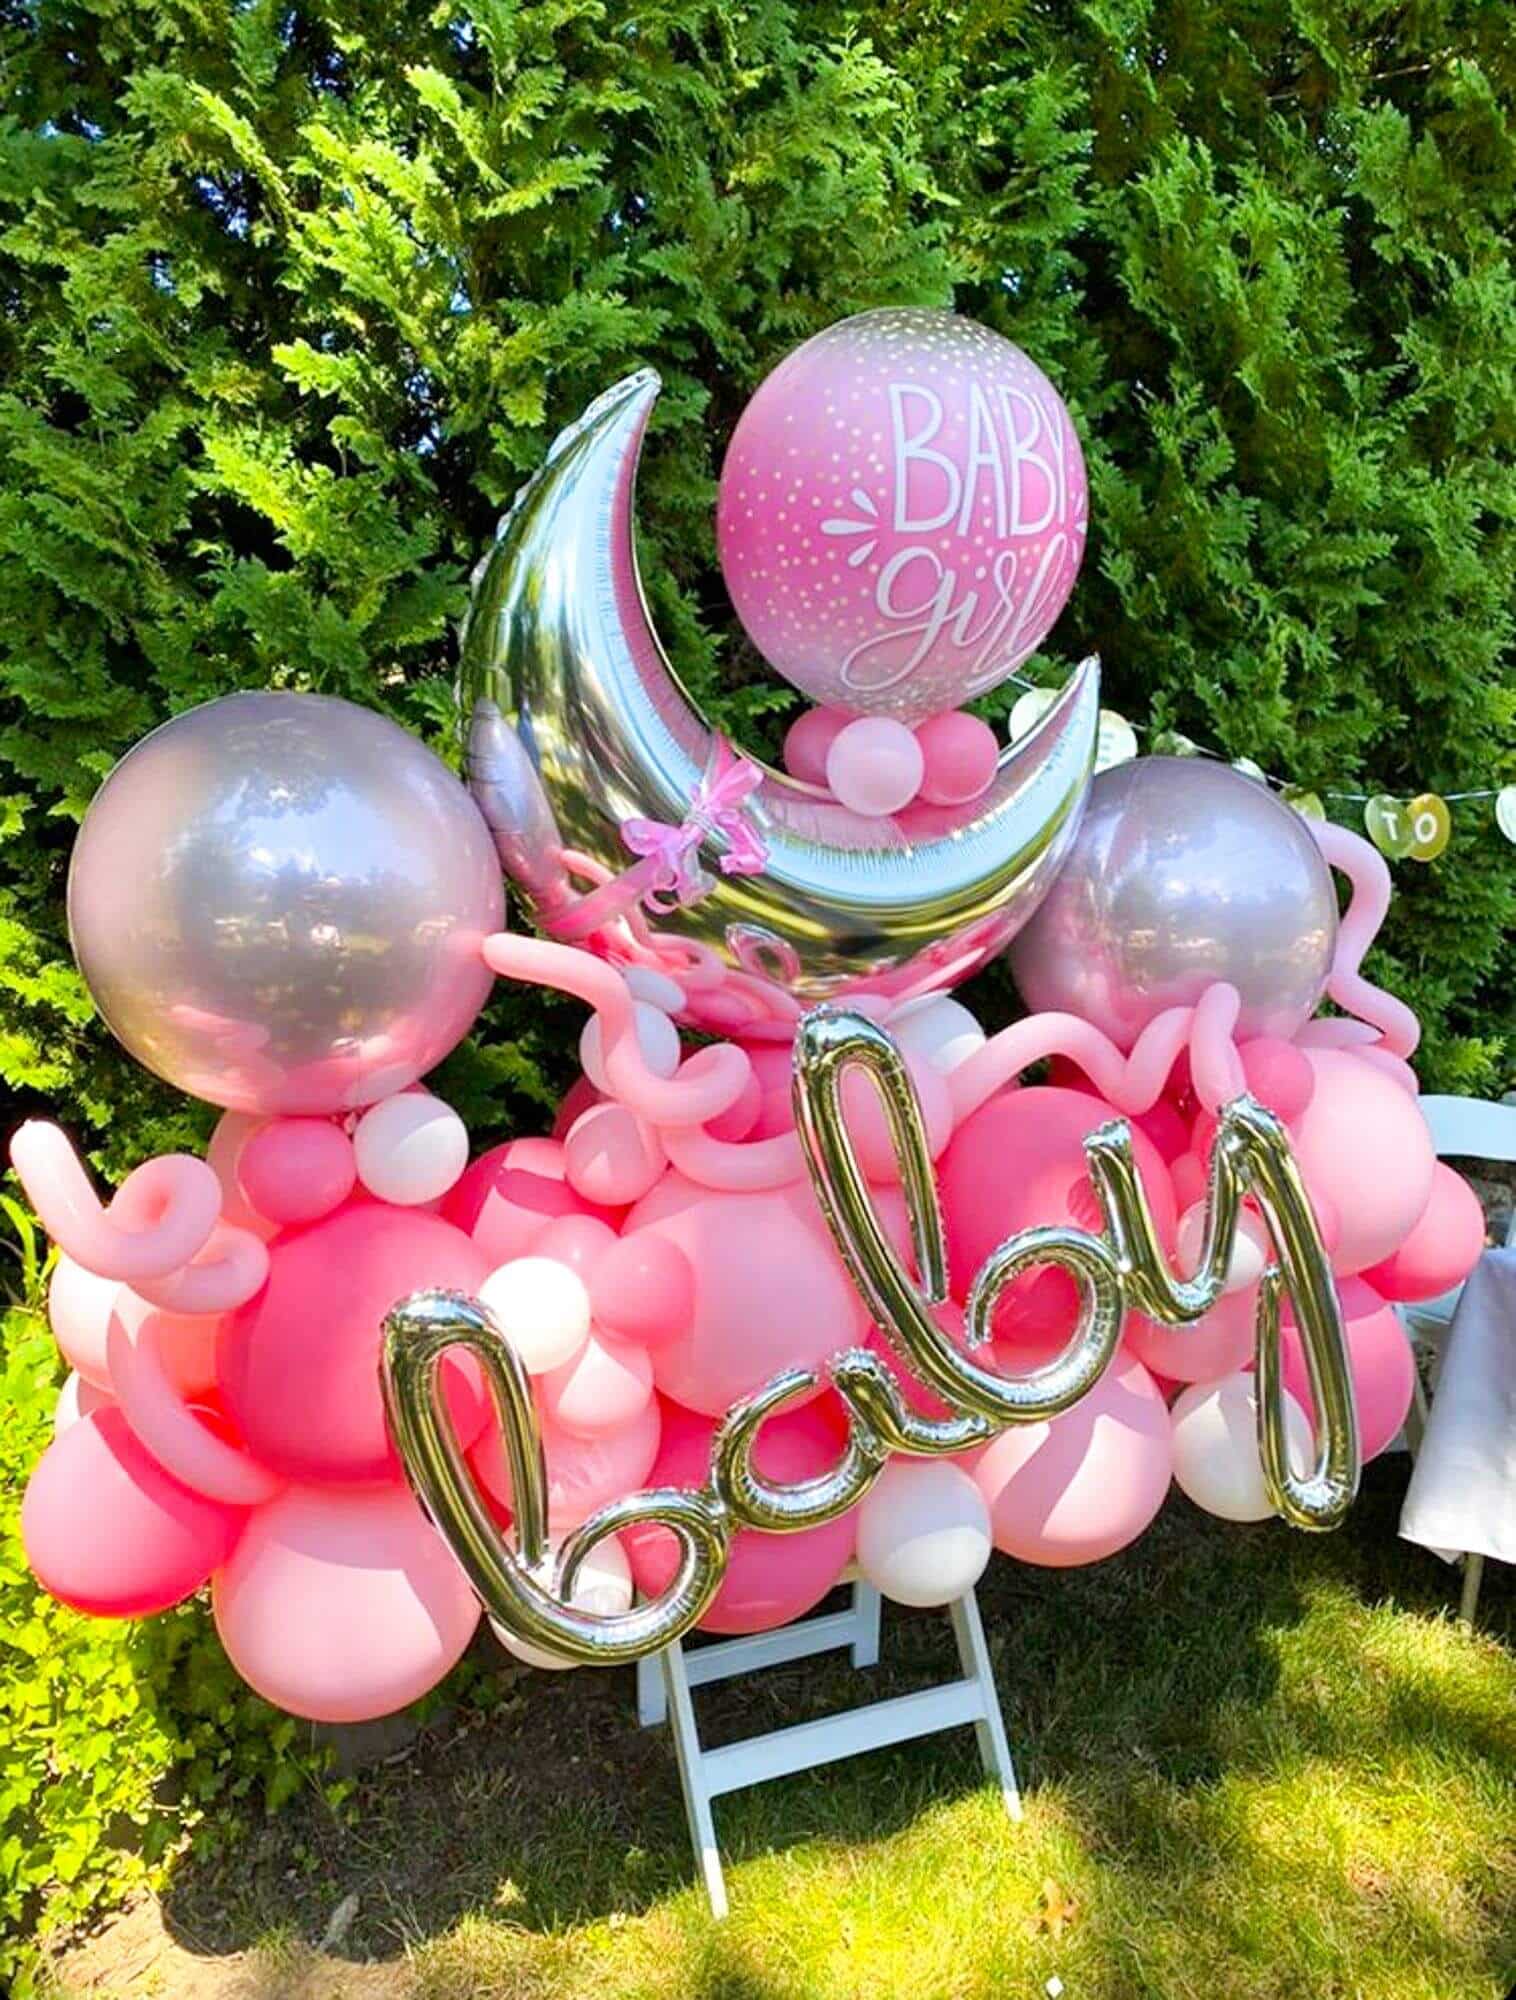 Baby Showers Baby Namings Balloon Artistry